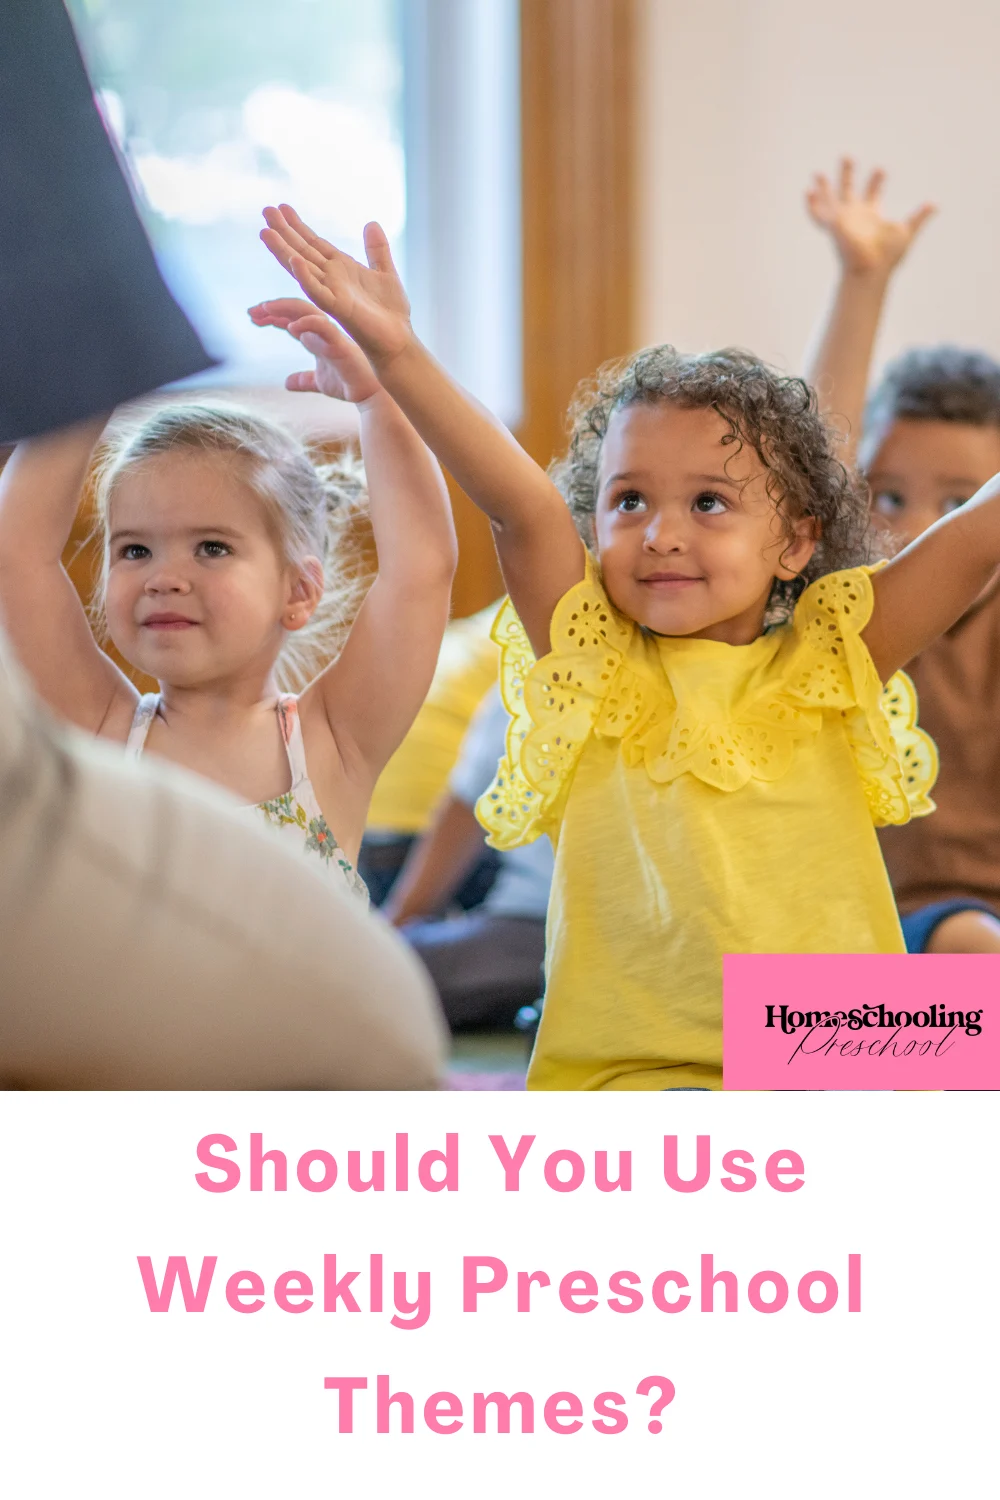 Should You Use Weekly Preschool Themes?